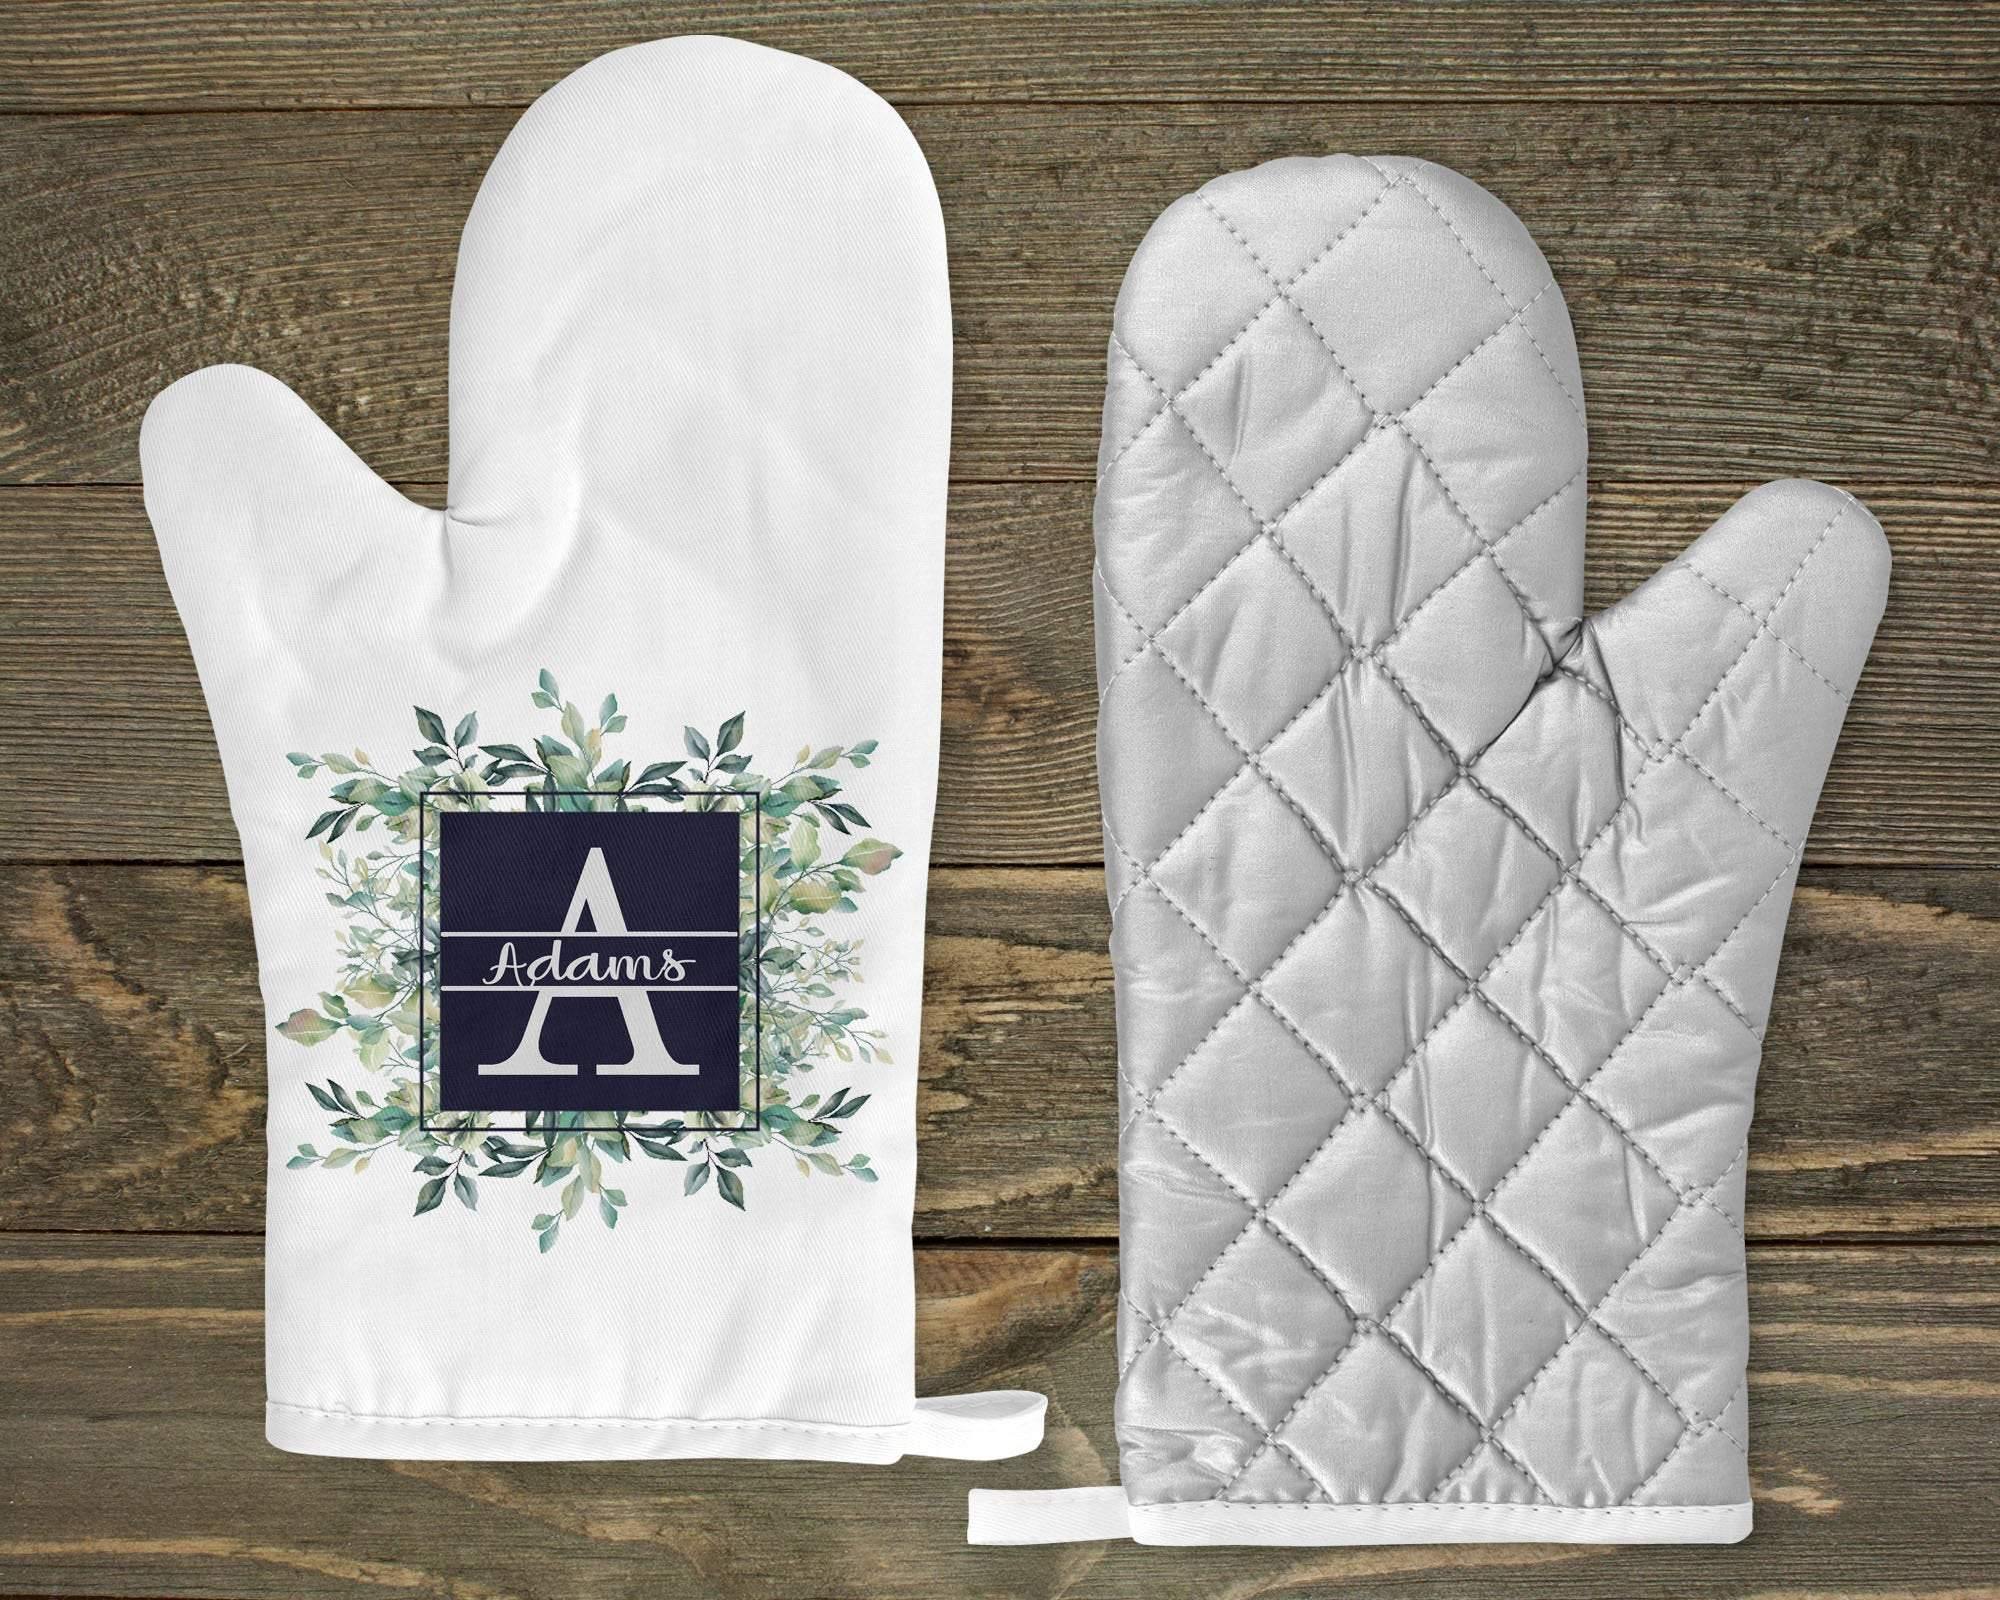 Personalized Oven Mitts | Custom Kitchen Decor | Succulent Bouquet - This & That Solutions - Personalized Oven Mitts | Custom Kitchen Decor | Succulent Bouquet - Personalized Gifts & Custom Home Decor